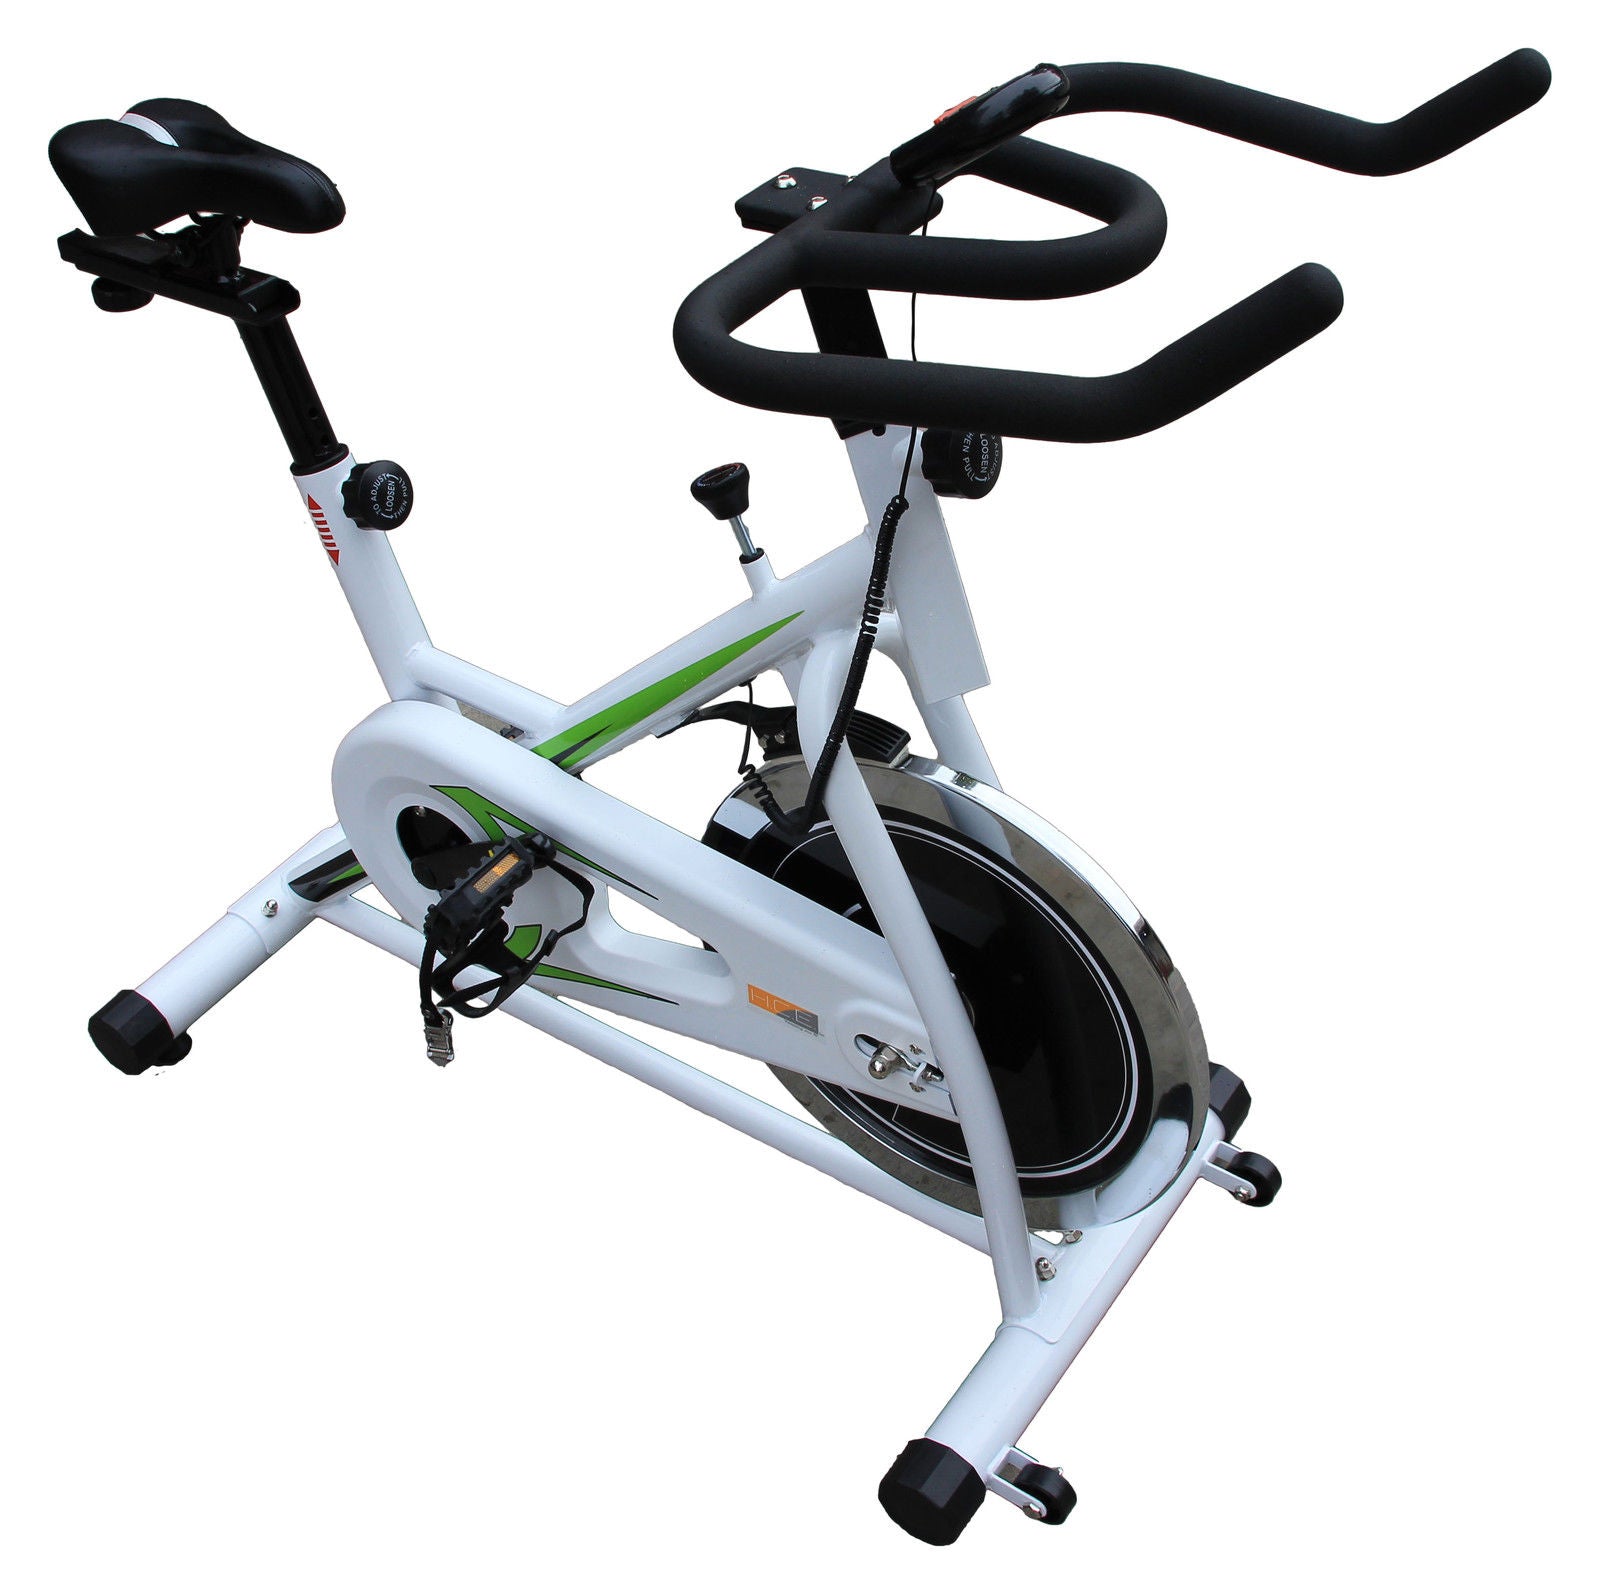 OZ Commercial Spin Flywheel Bike Fully Adjustable For Home Gym Fitness Exercise - iworkout.com.au